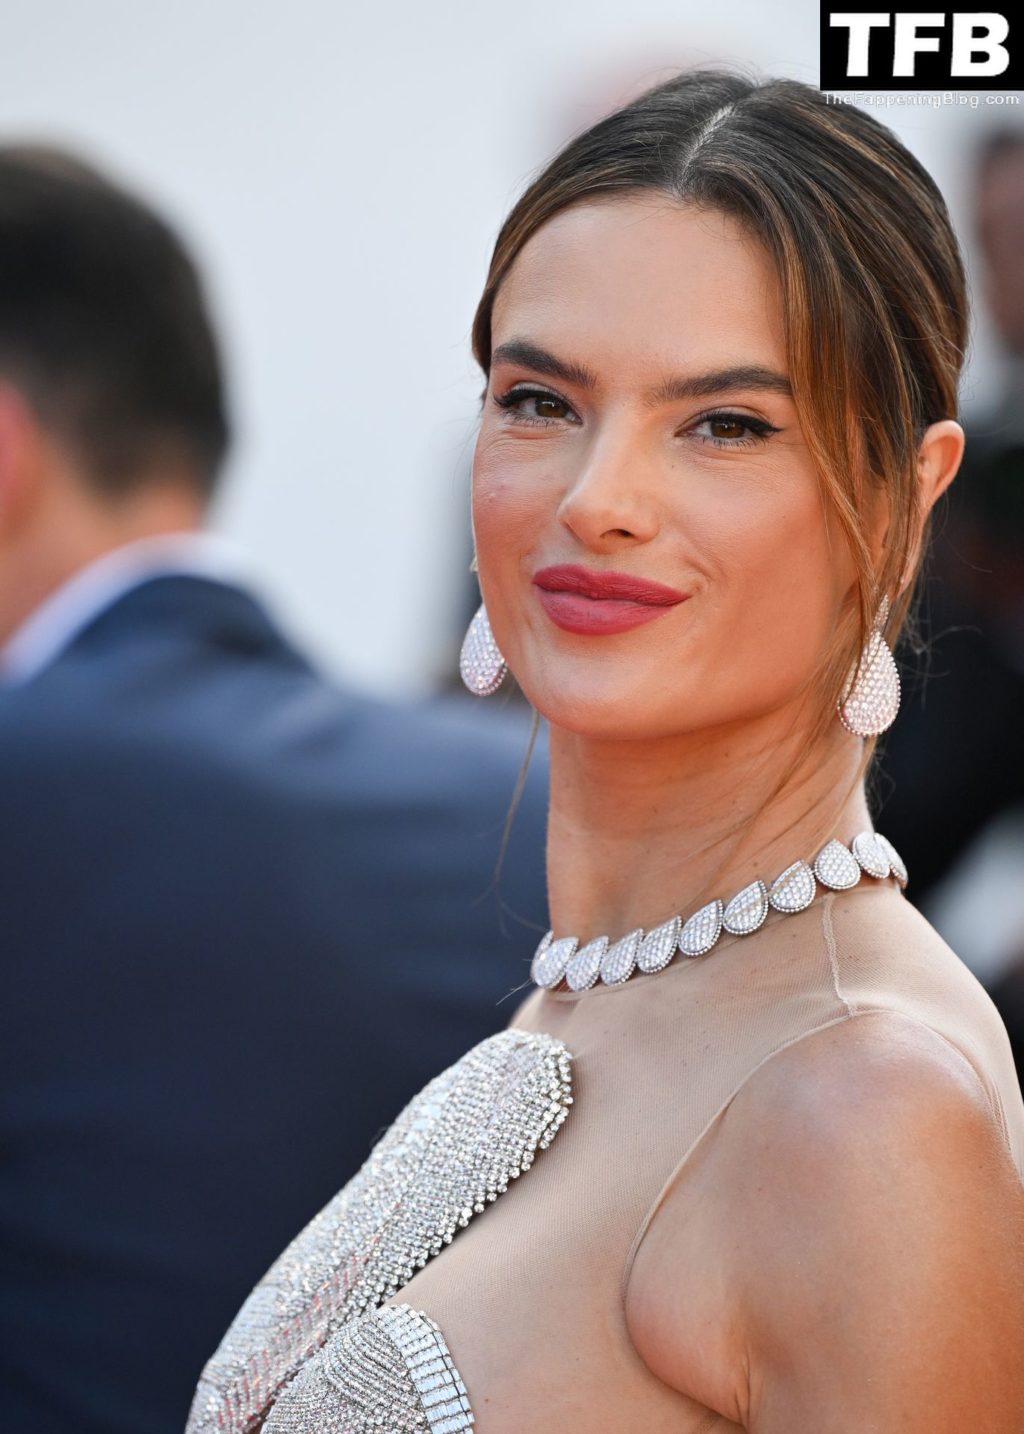 Alessandra Ambrosio Poses Braless as She Attends the Screening of “Armageddon Time” During the 75th Annual Cannes Film Festival (150 Photos)